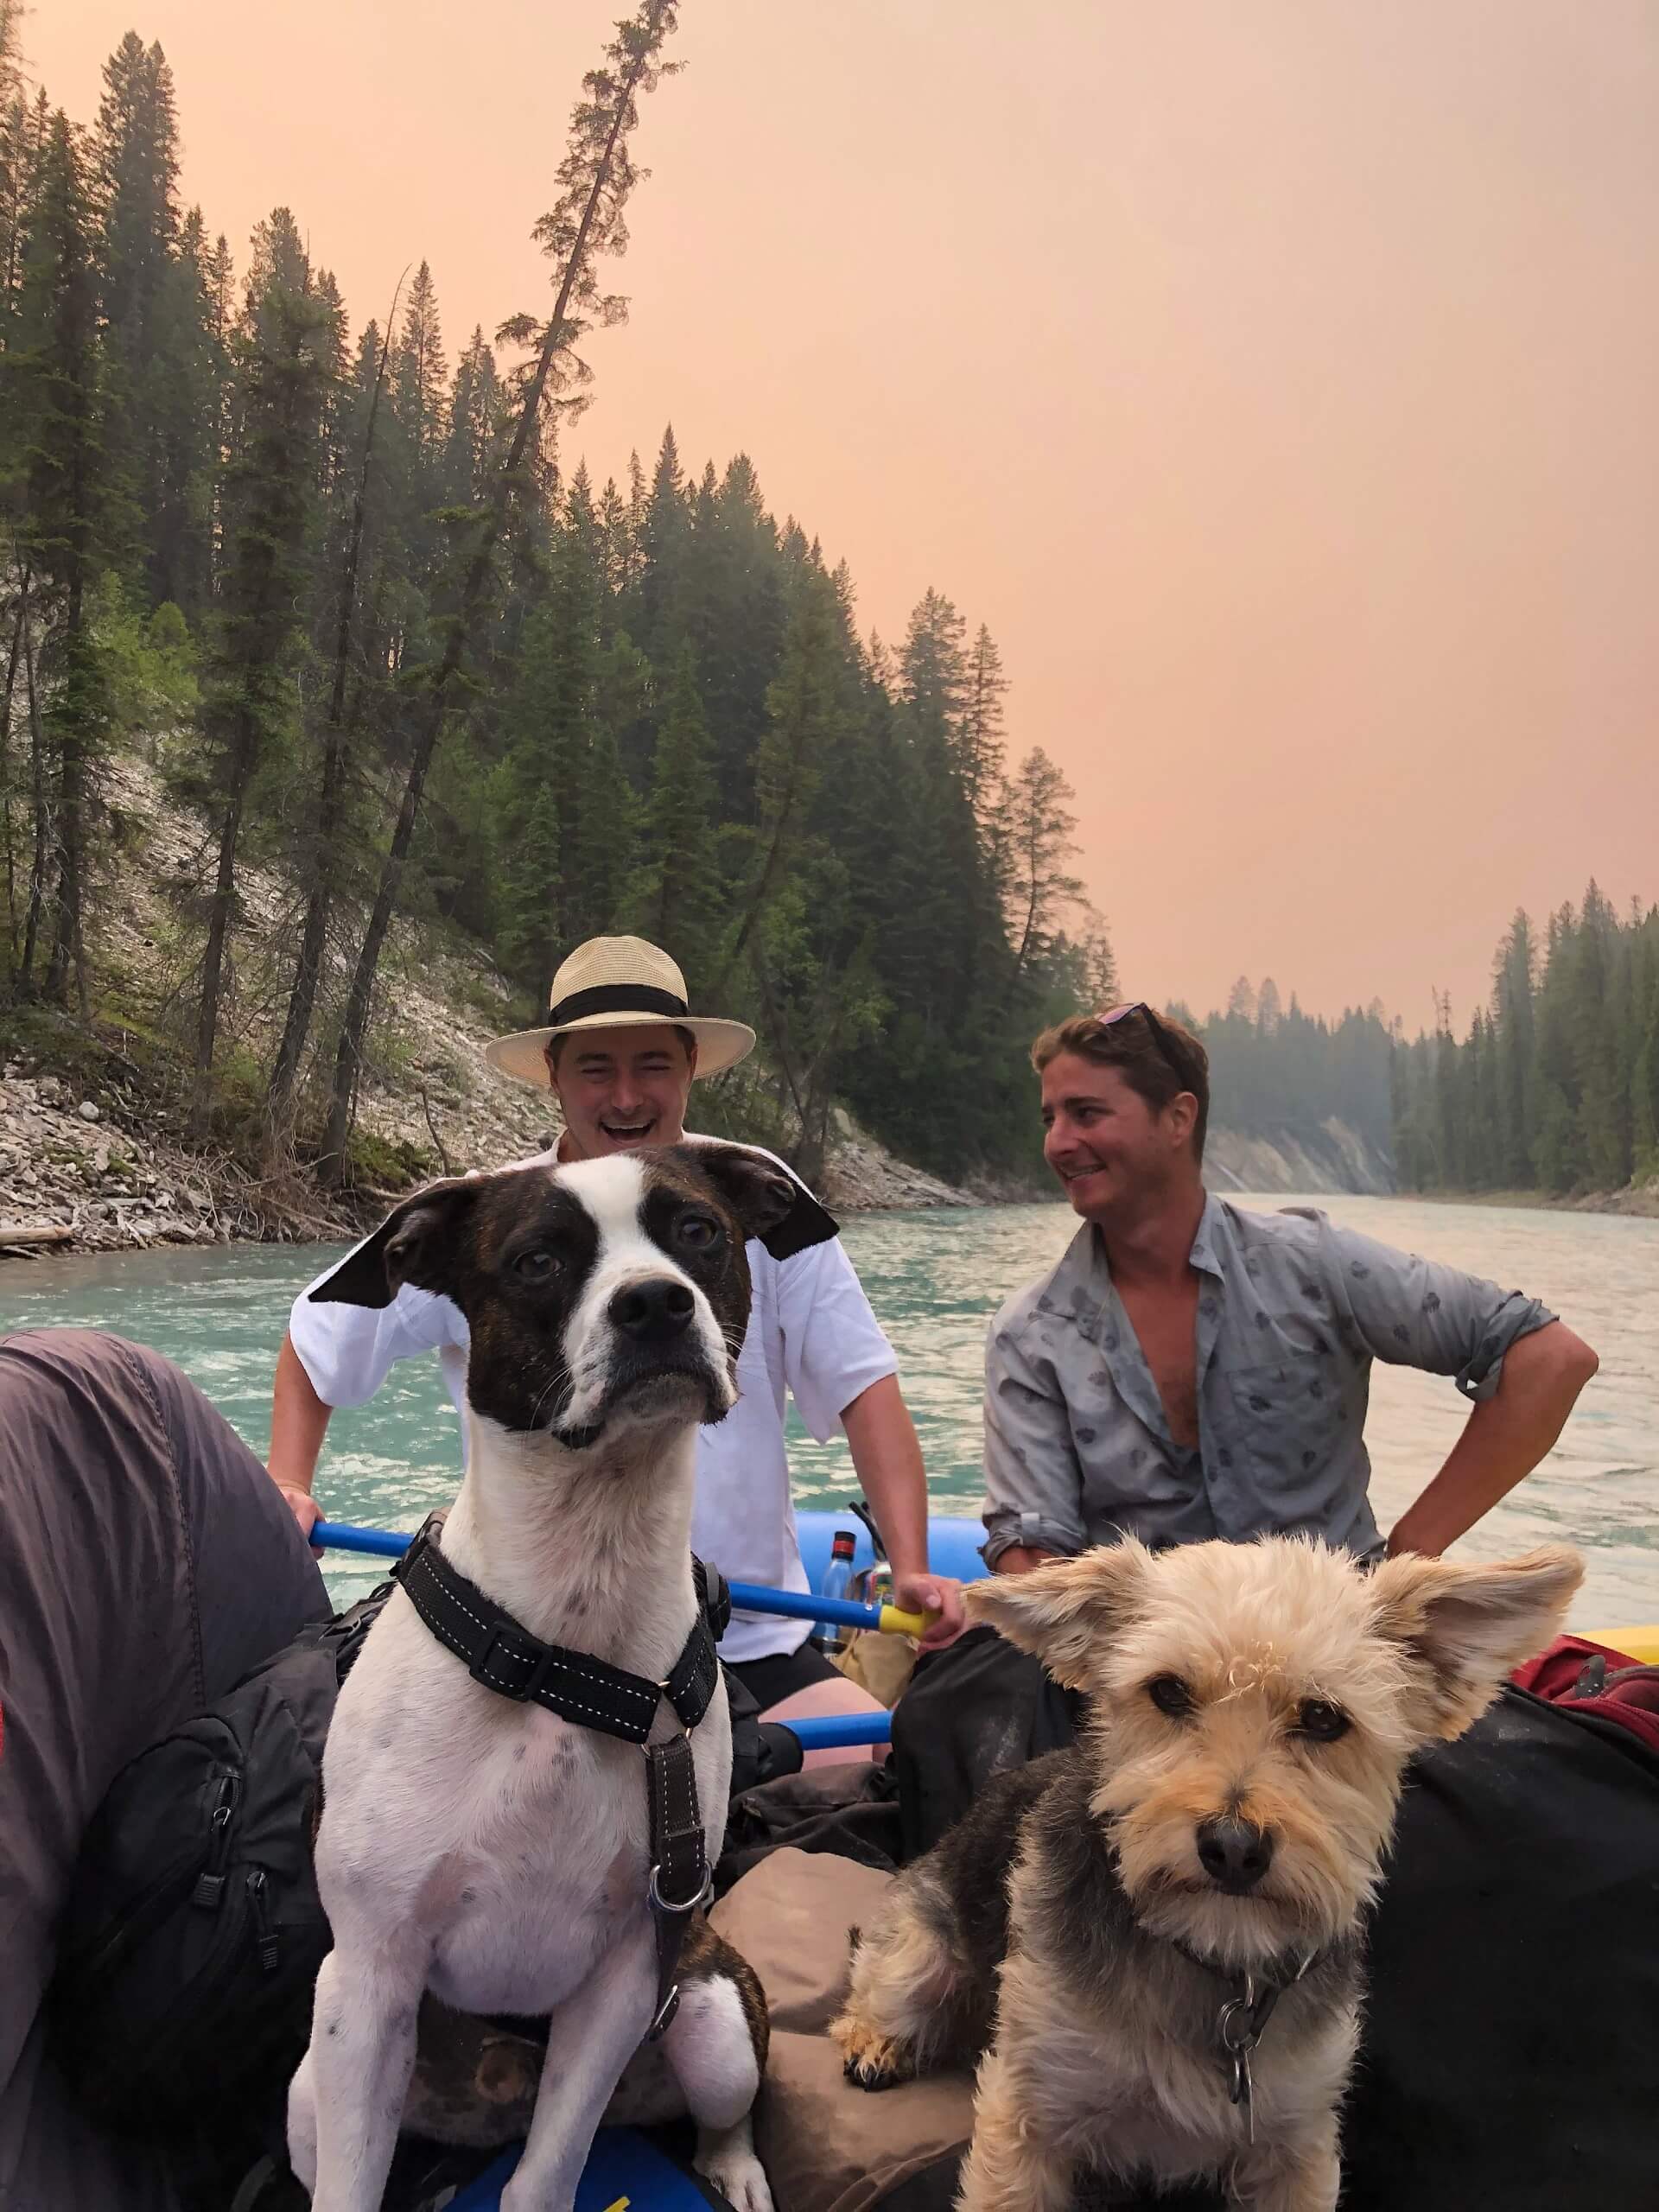 Kootenay River Rafting with dogs